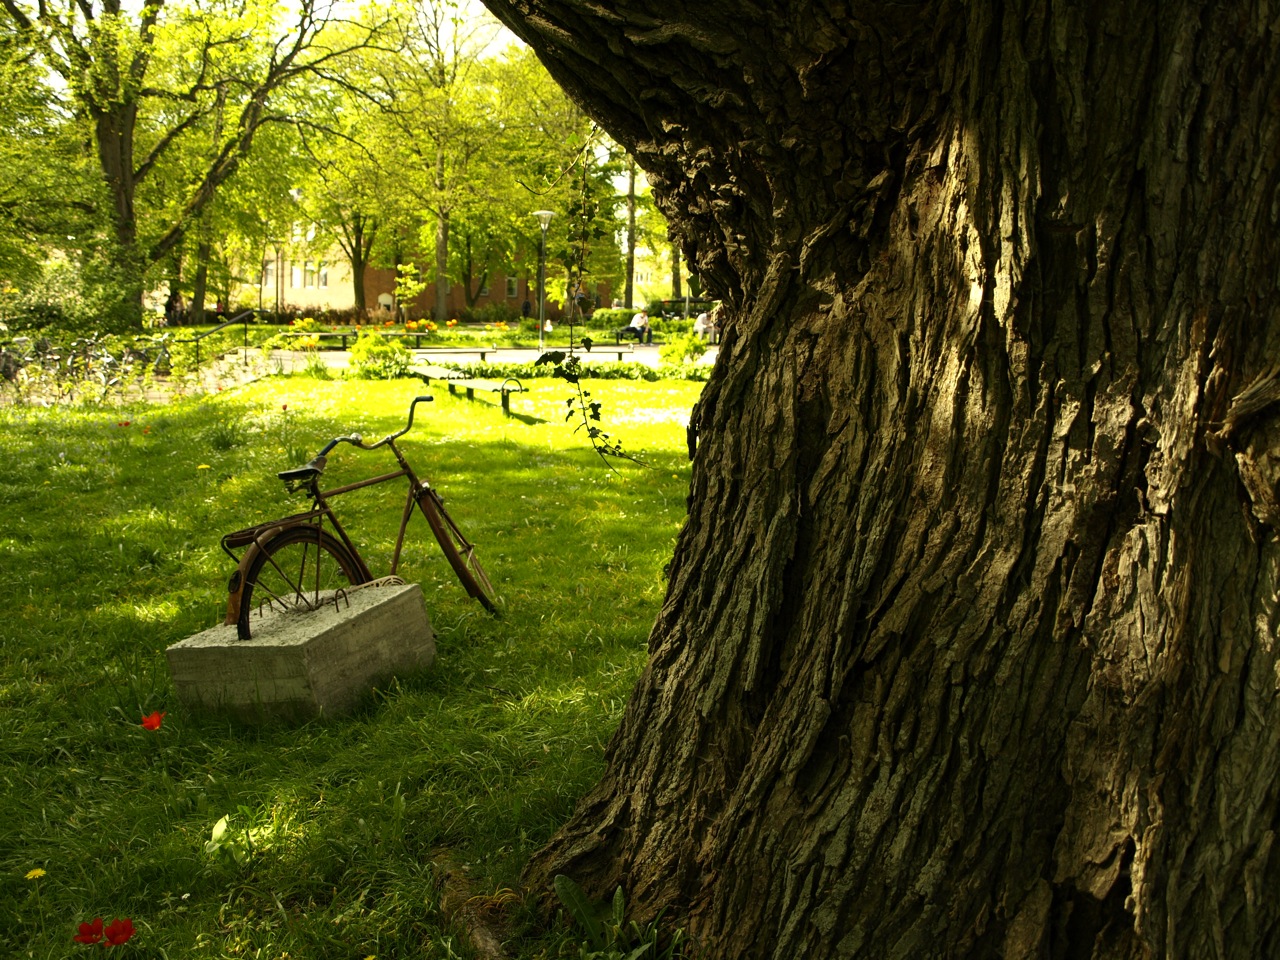 a bike sitting in the grass underneath a tree